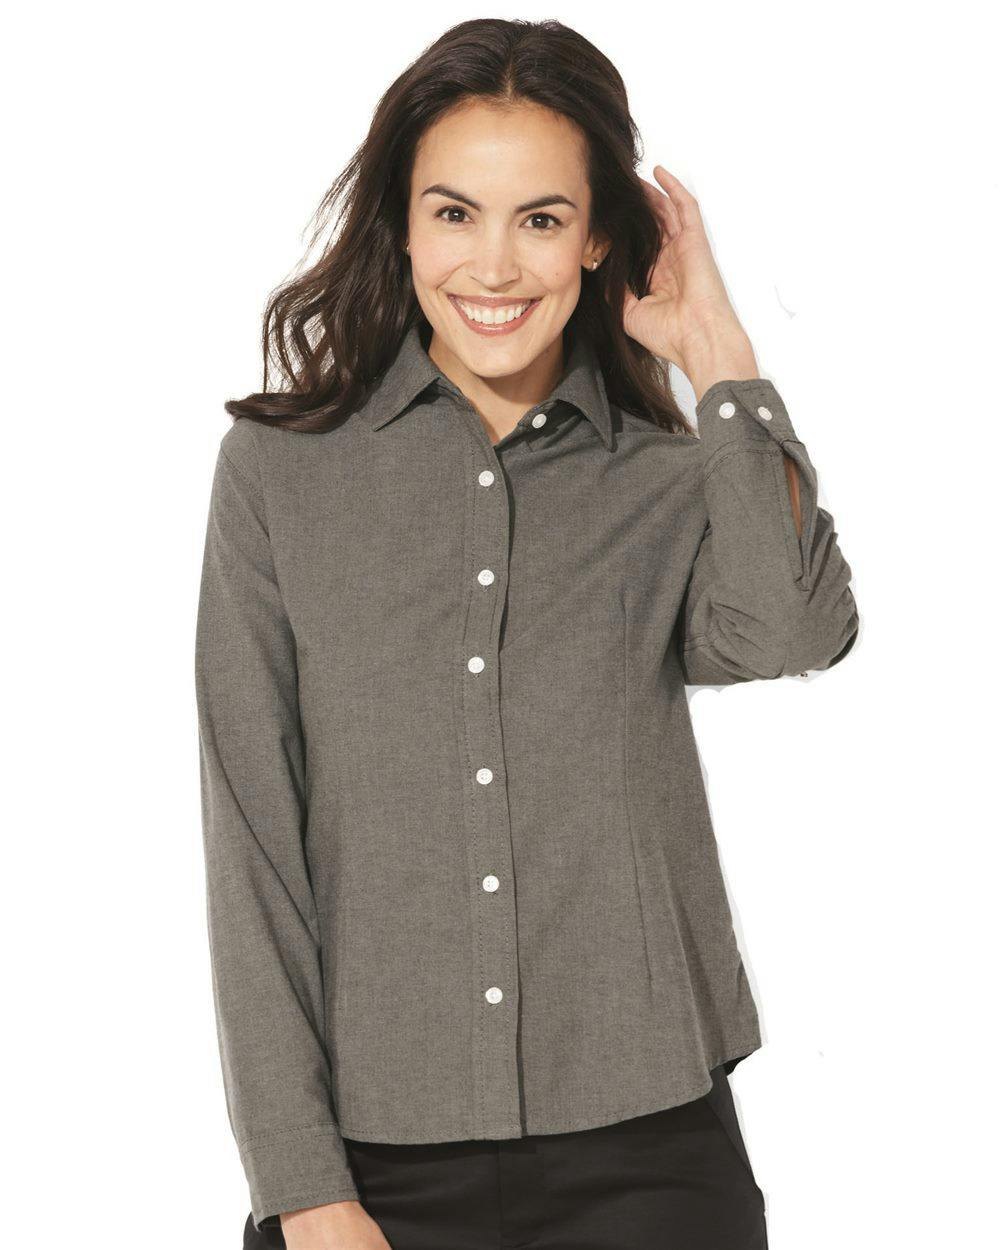 Image for Women's Long Sleeve Stain Resistant Oxford Shirt - 5233